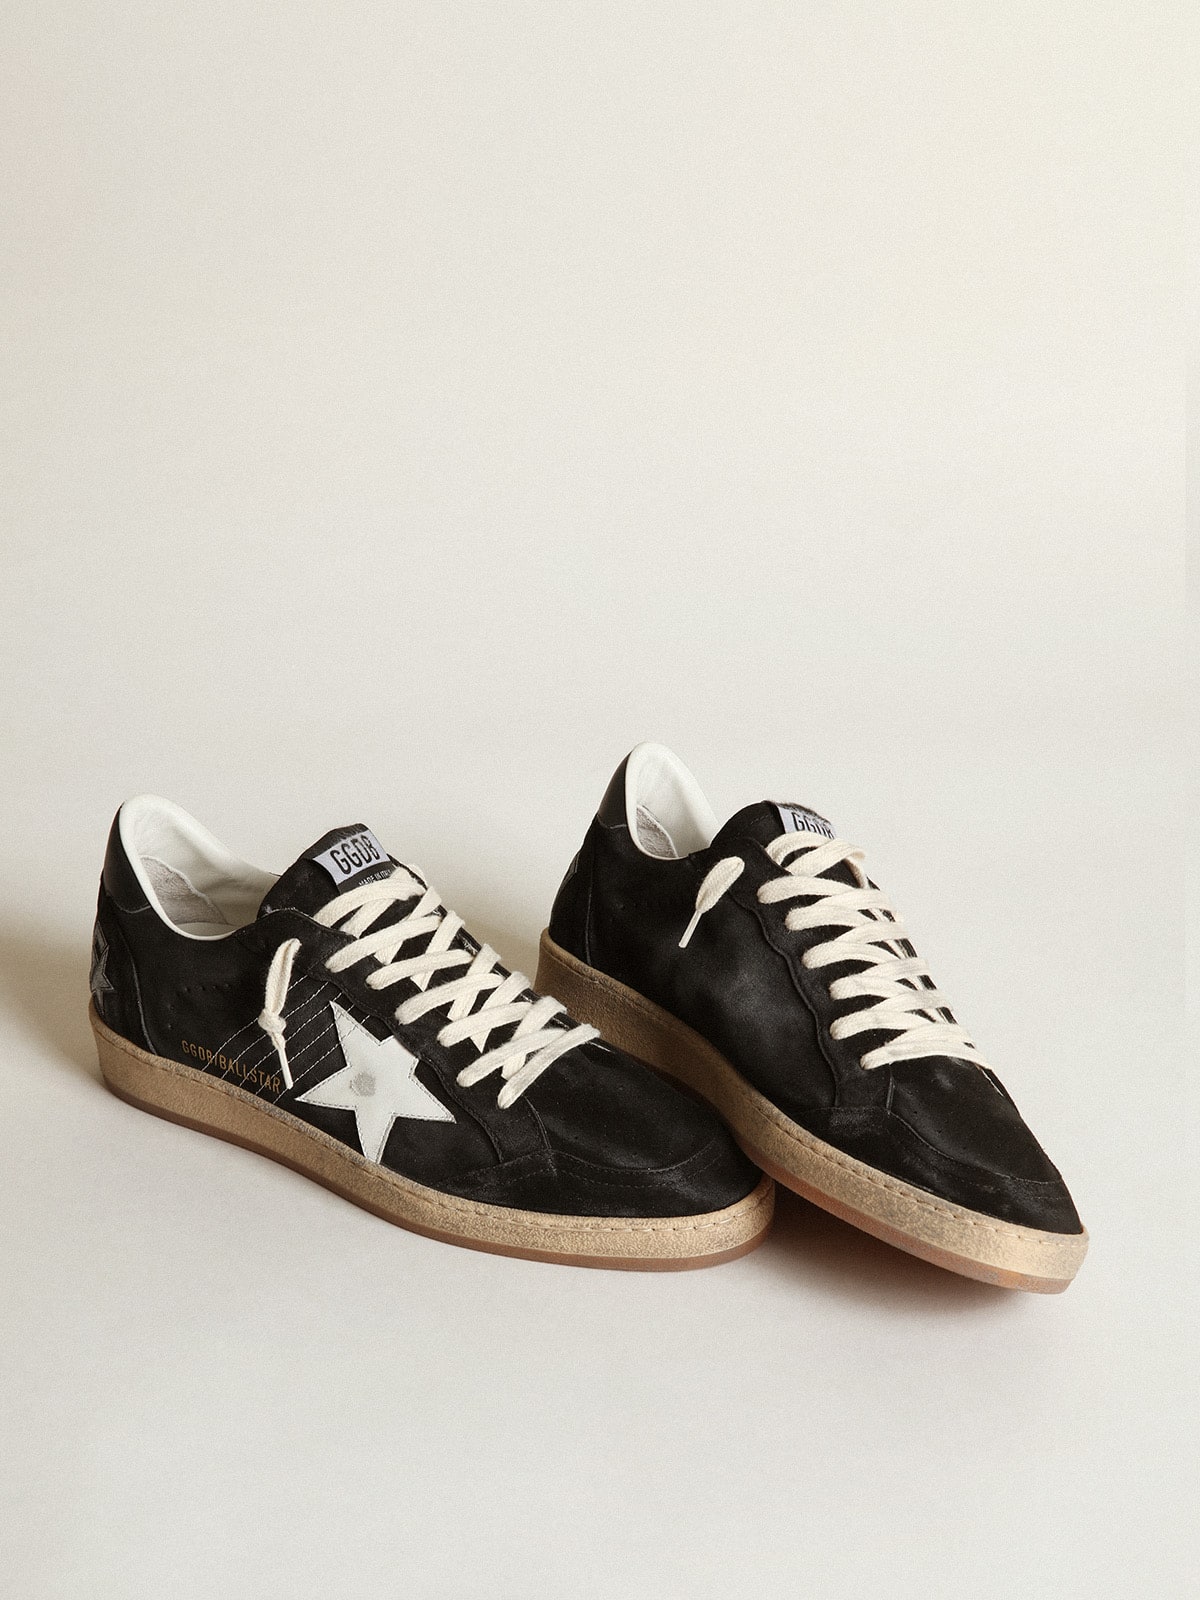 Women's Ball Star in black suede with white leather star